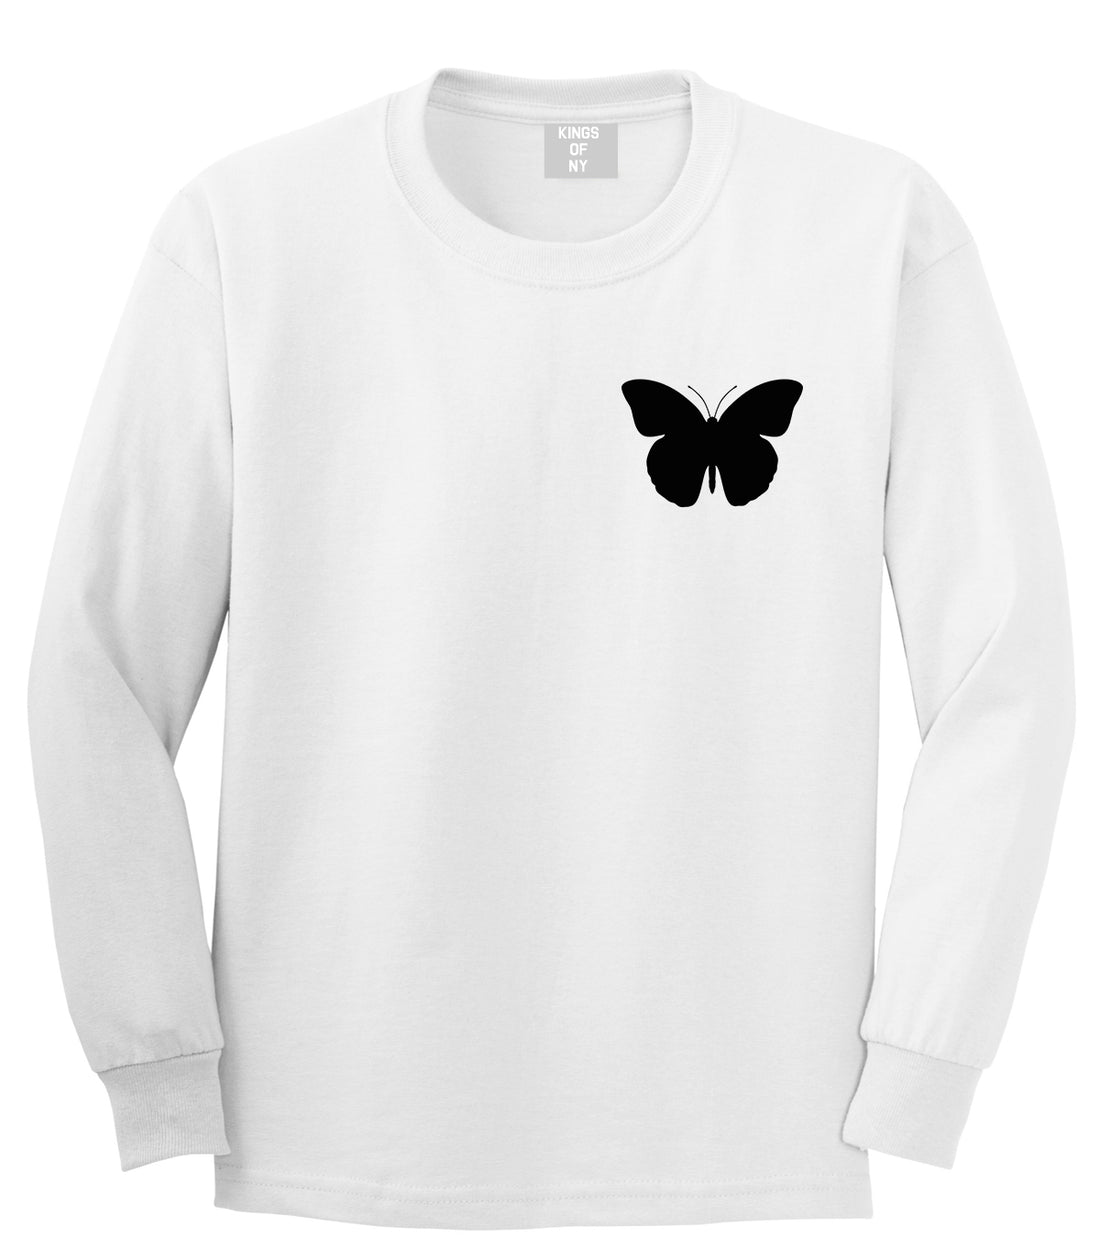 Butterfly Chest White Long Sleeve T-Shirt by Kings Of NY